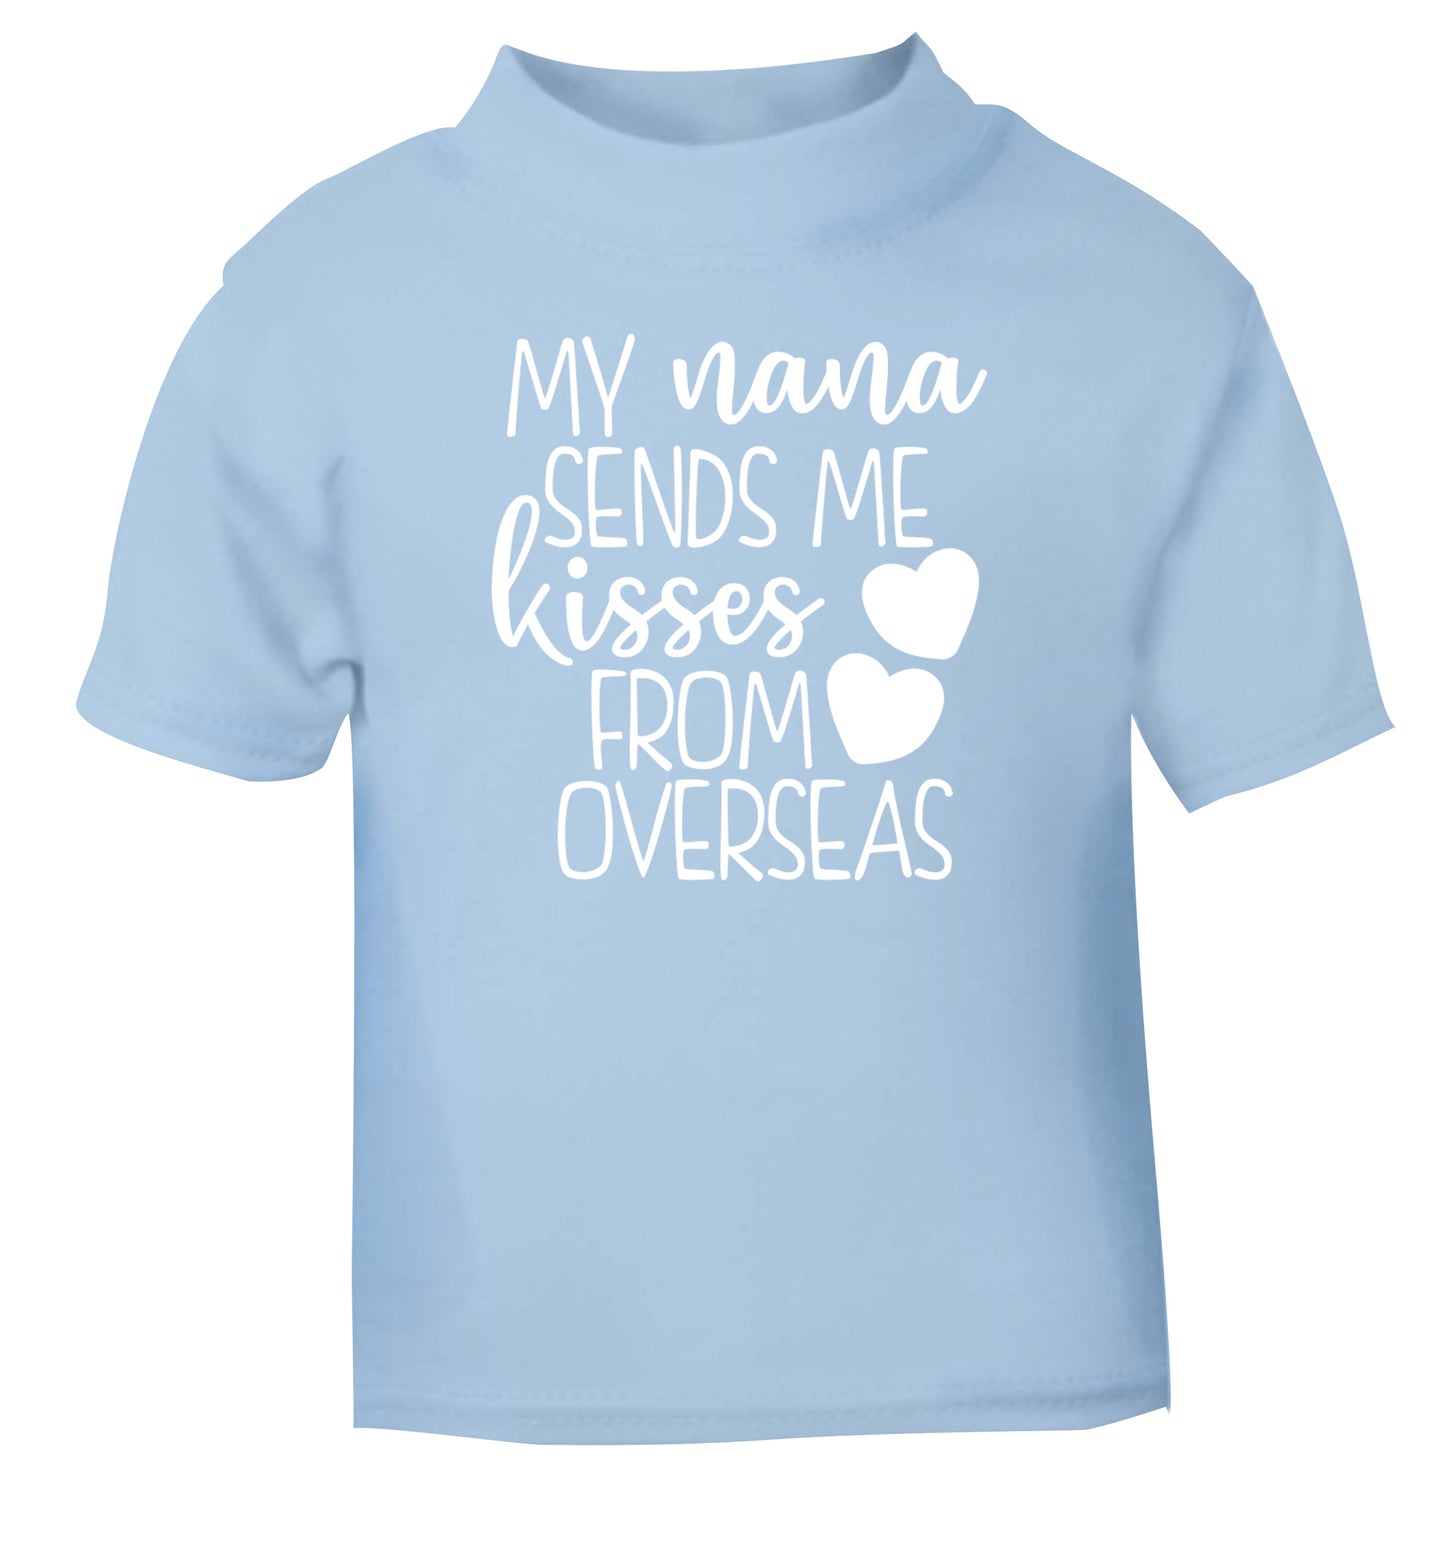 My nana sends me kisses from overseas light blue Baby Toddler Tshirt 2 Years